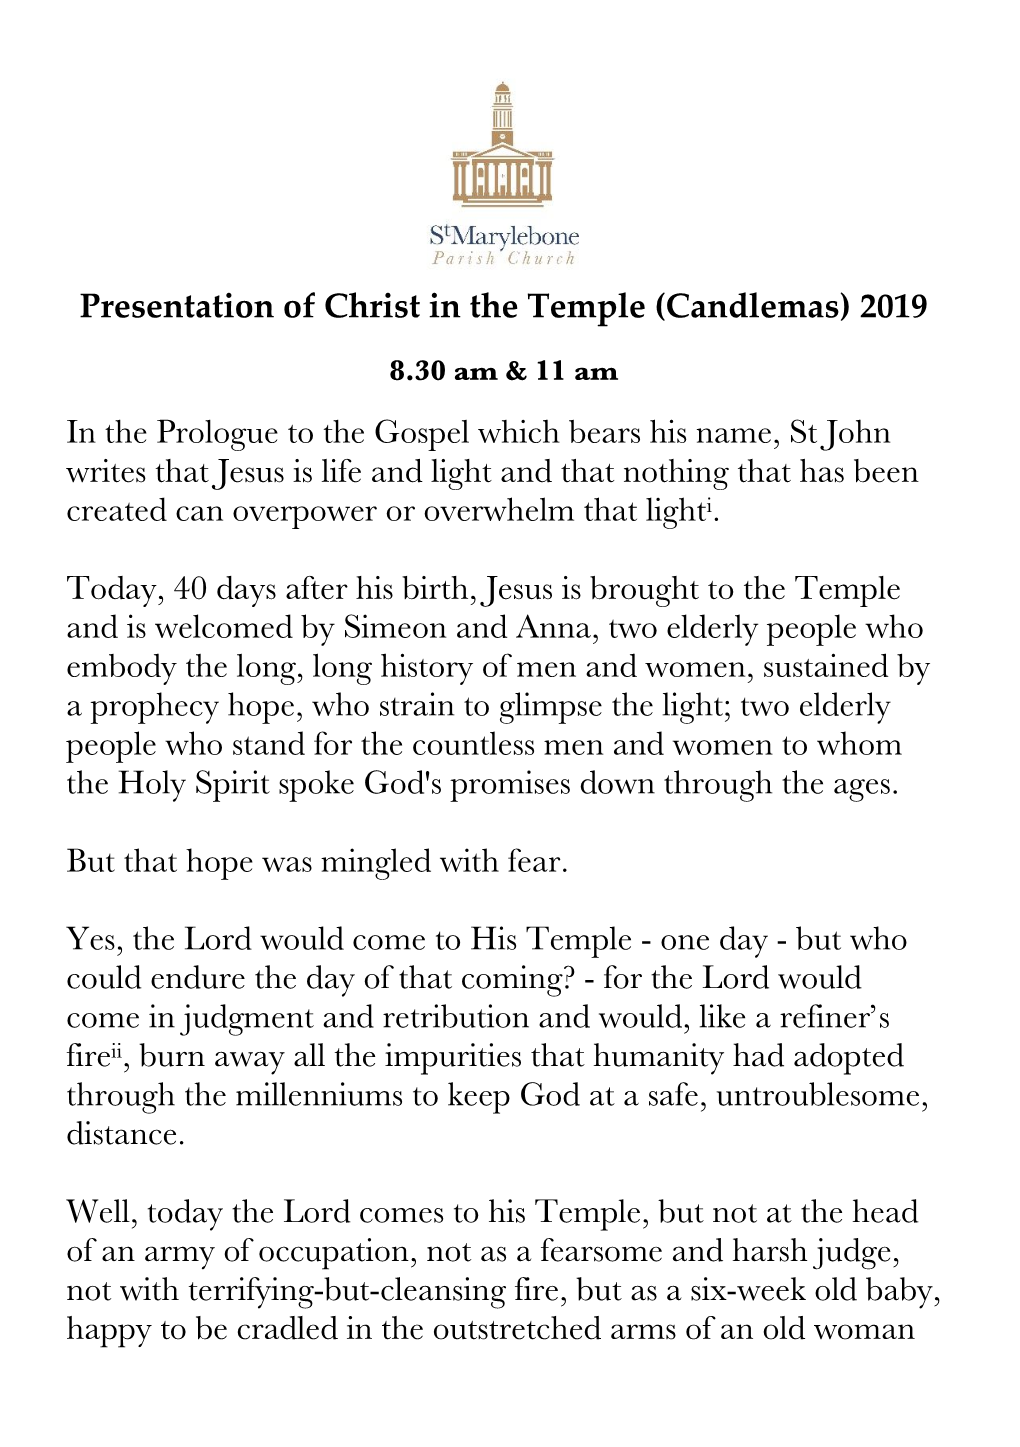 Presentation of Christ in the Temple (Candlemas) 2019 in the Prologue